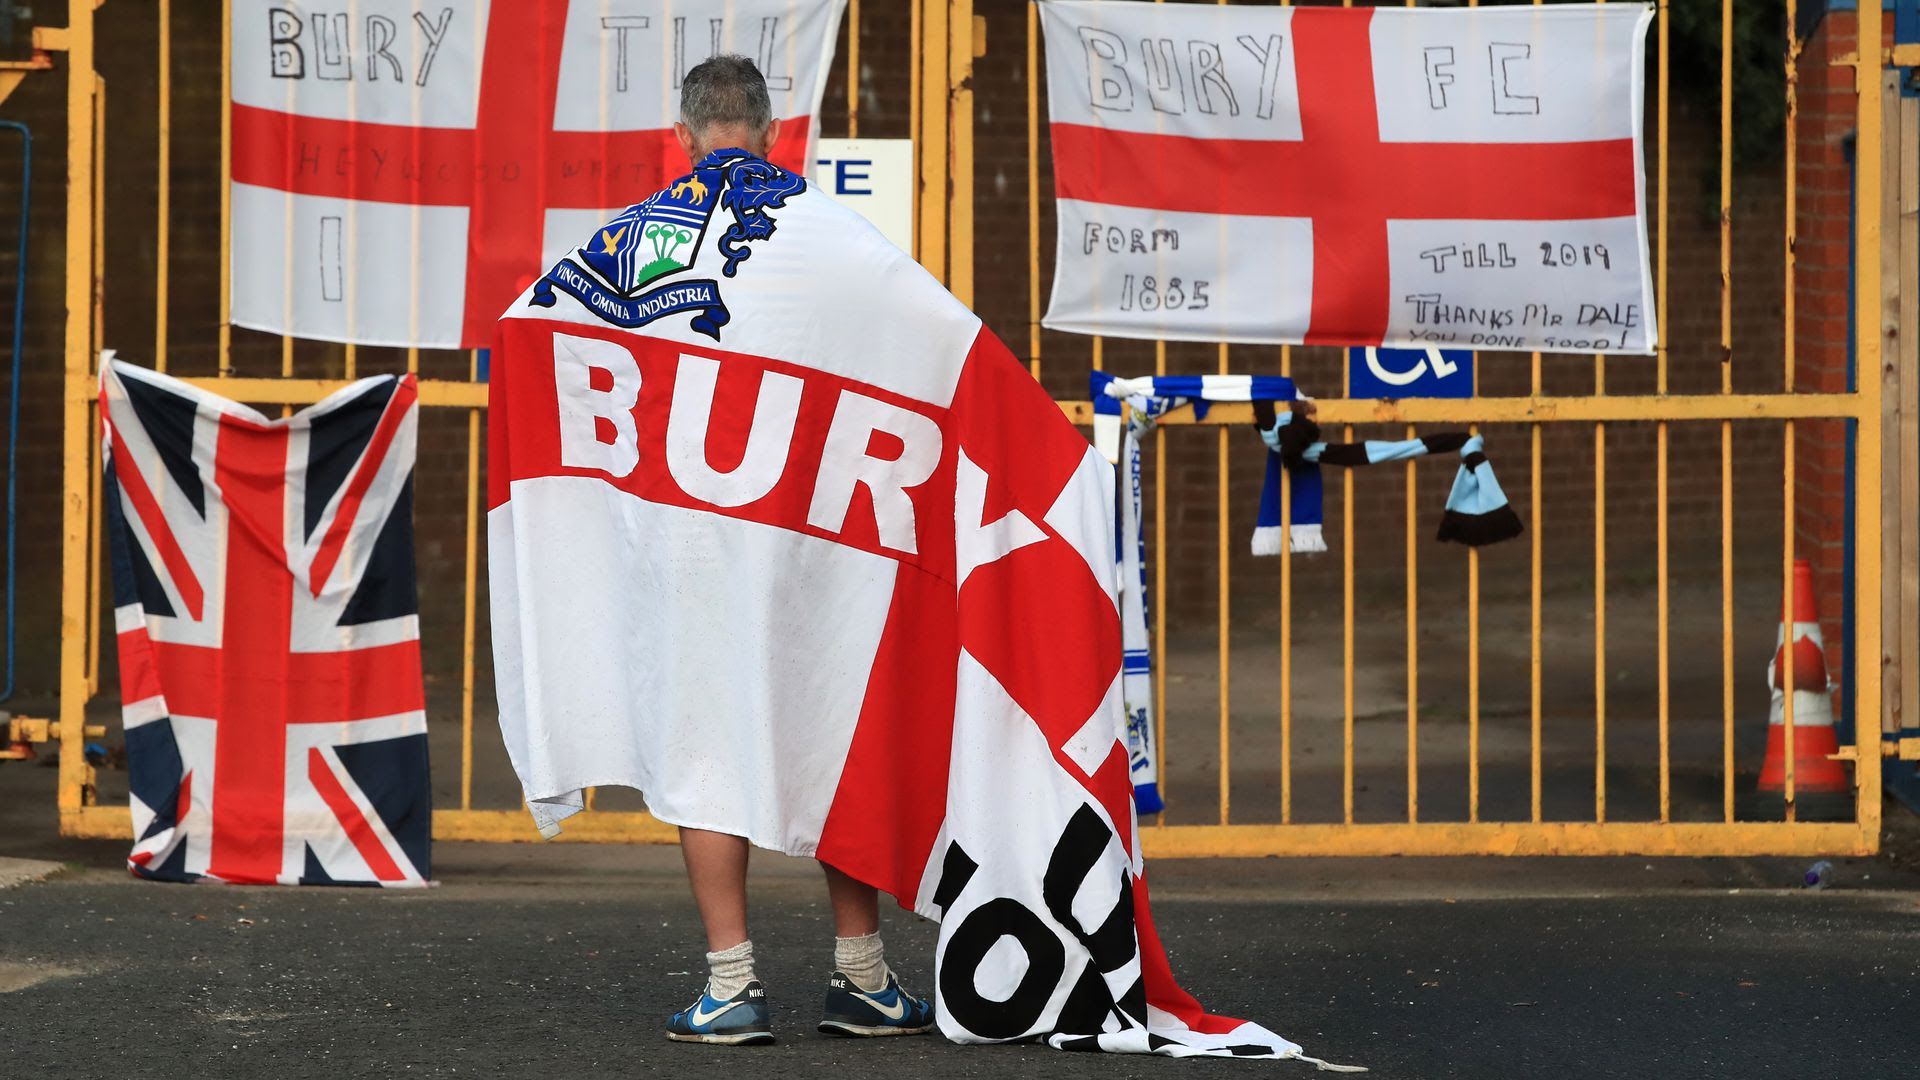 A man standing in front of the now closed English soccer club Bury FC